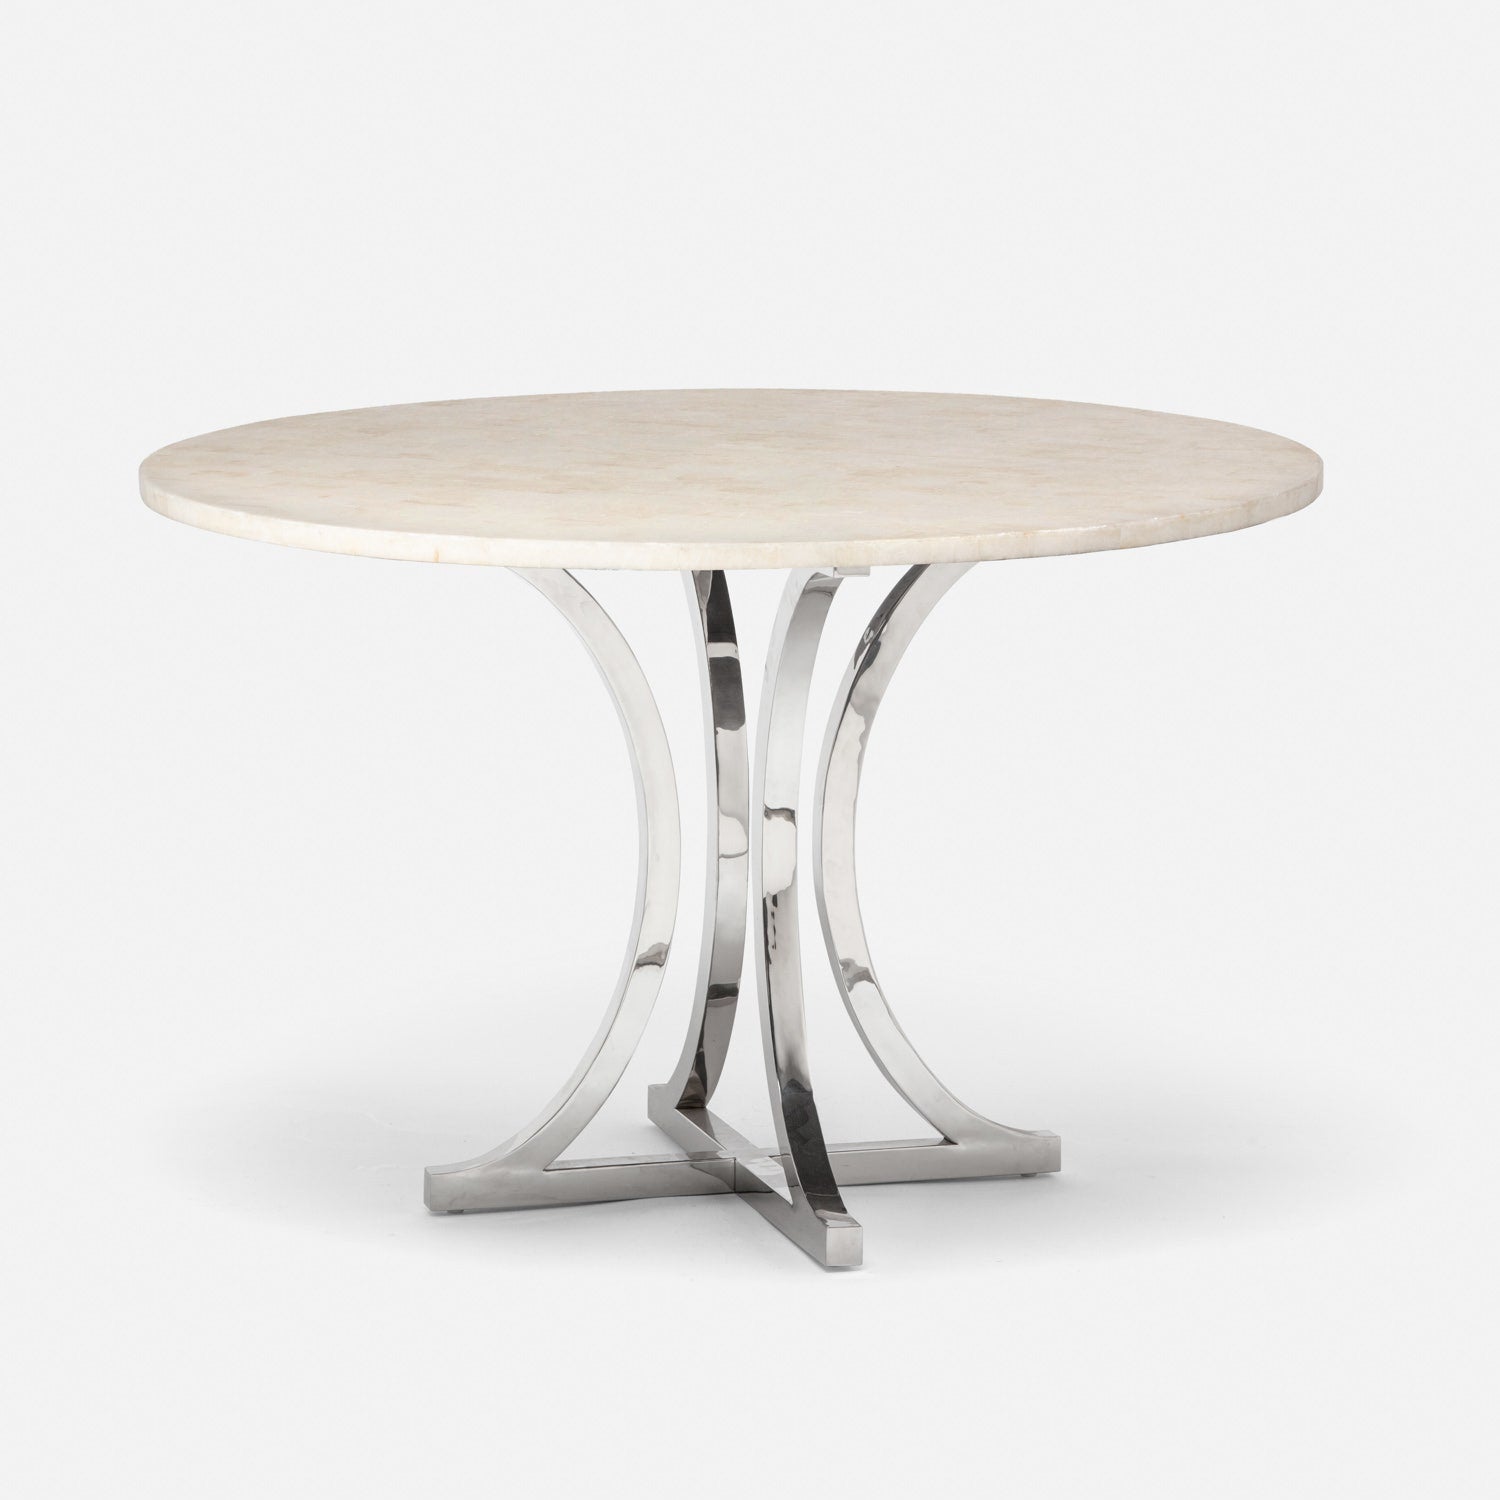 Made Goods Leighton 54" x 30" Polished Silver Steel Dinning Table With Round Ice Crystal Stone Table Top